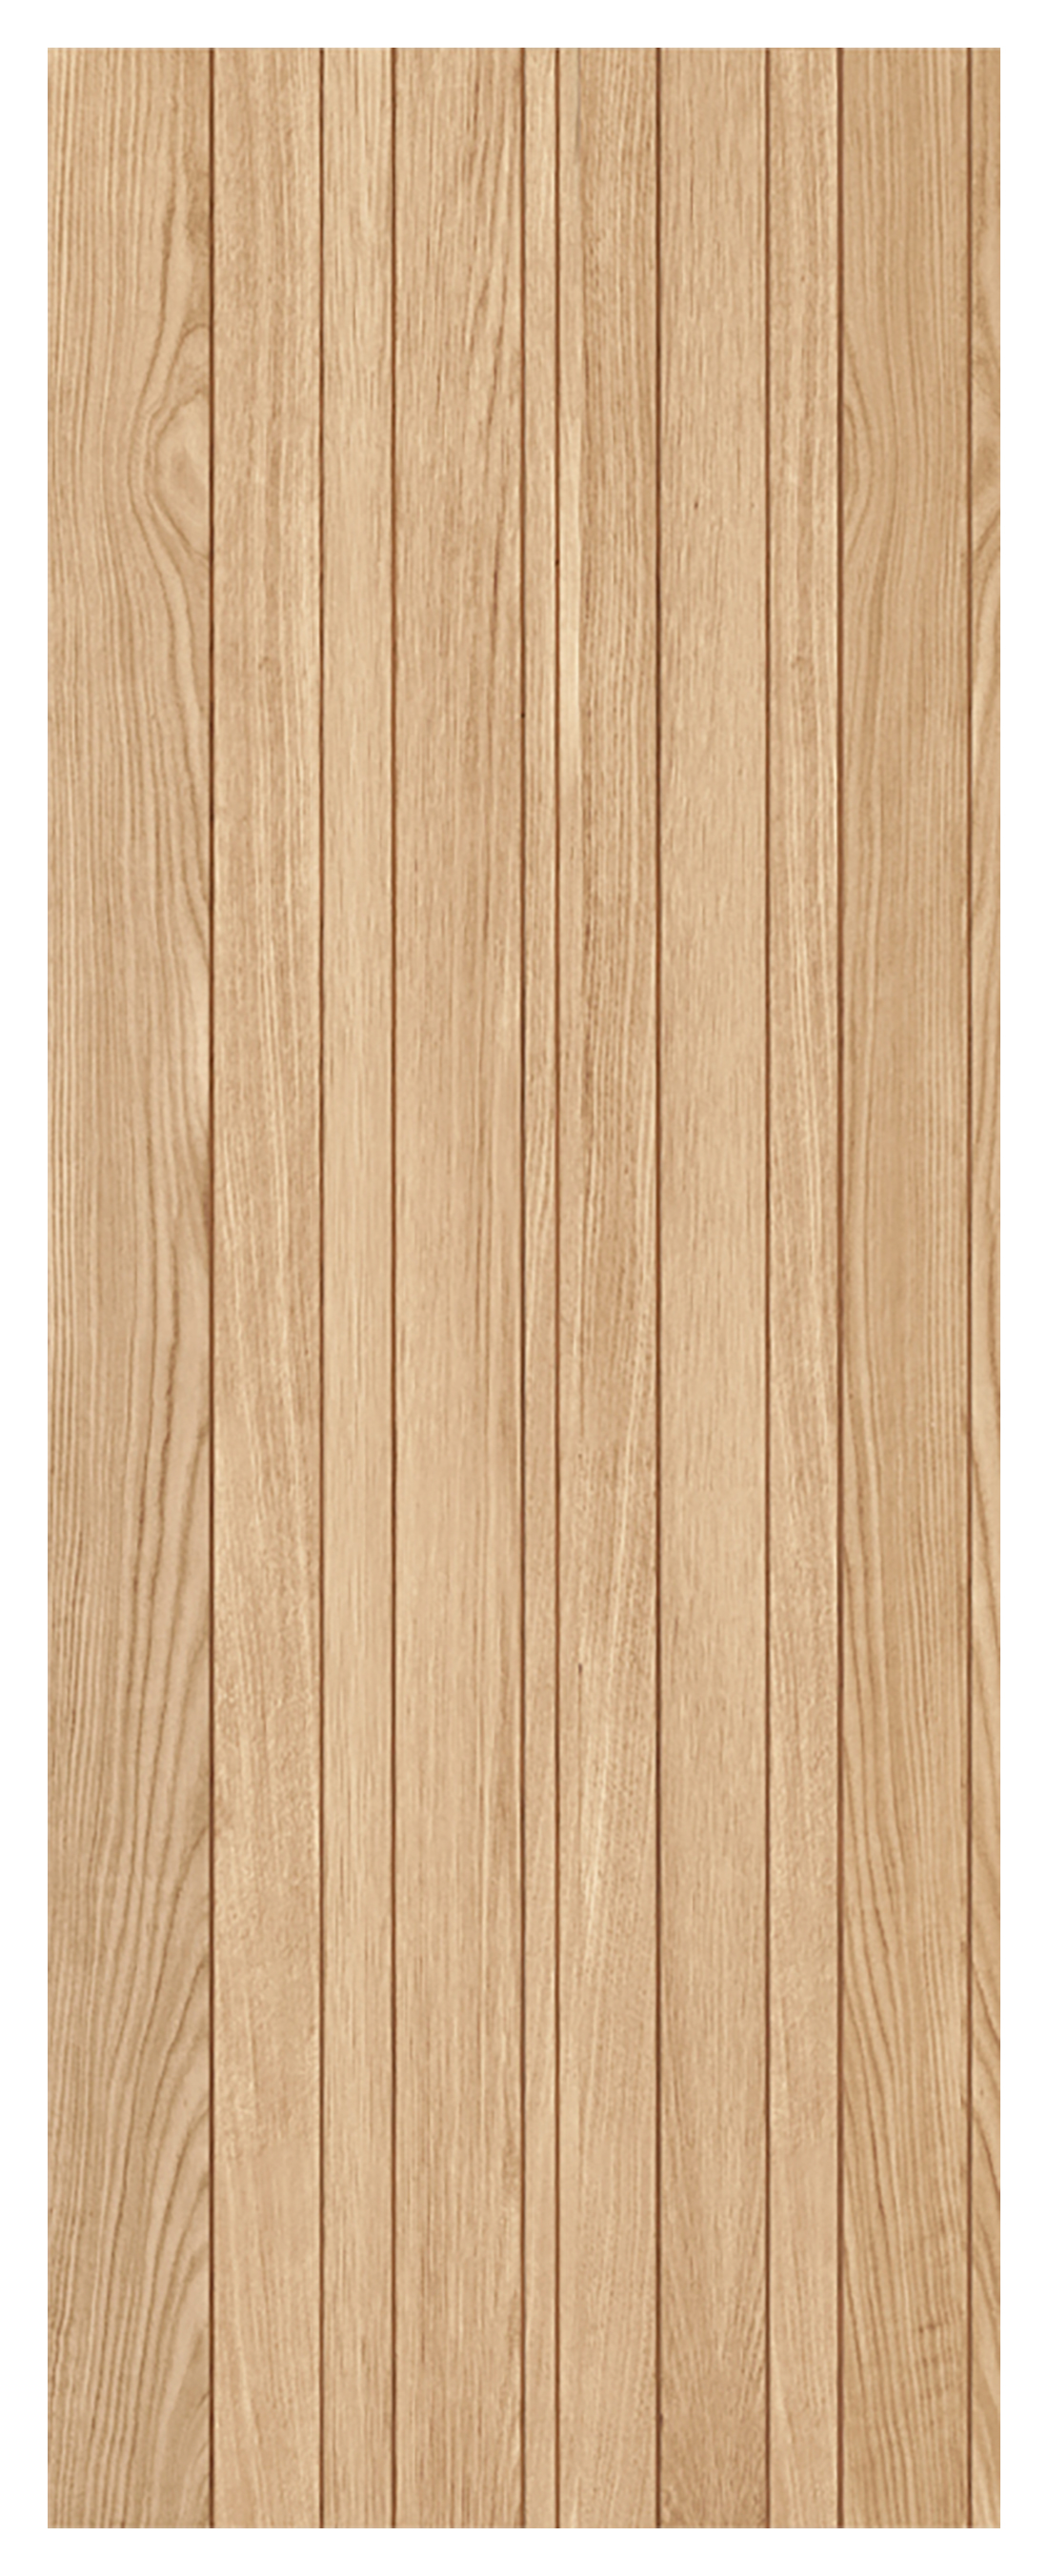 Image of LPD Internal Montreal Pre-Finished Oak Solid Core Door - 762 x 1981mm